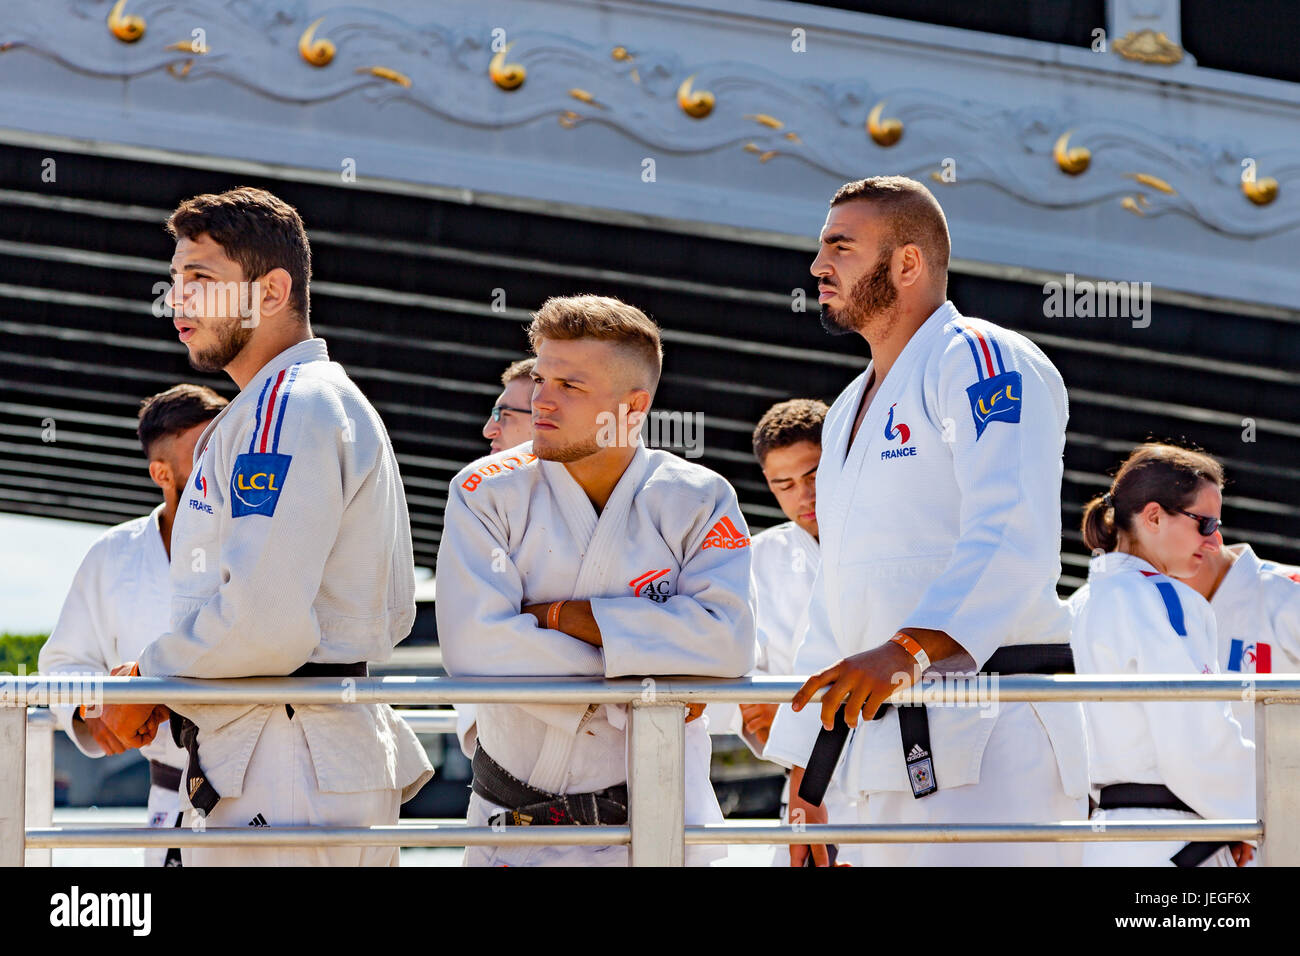 Paris, France. 24th Jun, 2017. Judo champion atheletes demonstrate during the Paris Olympic Games 2024 showcase. Credit: Guillaume Louyot/Alamy Live News Stock Photo